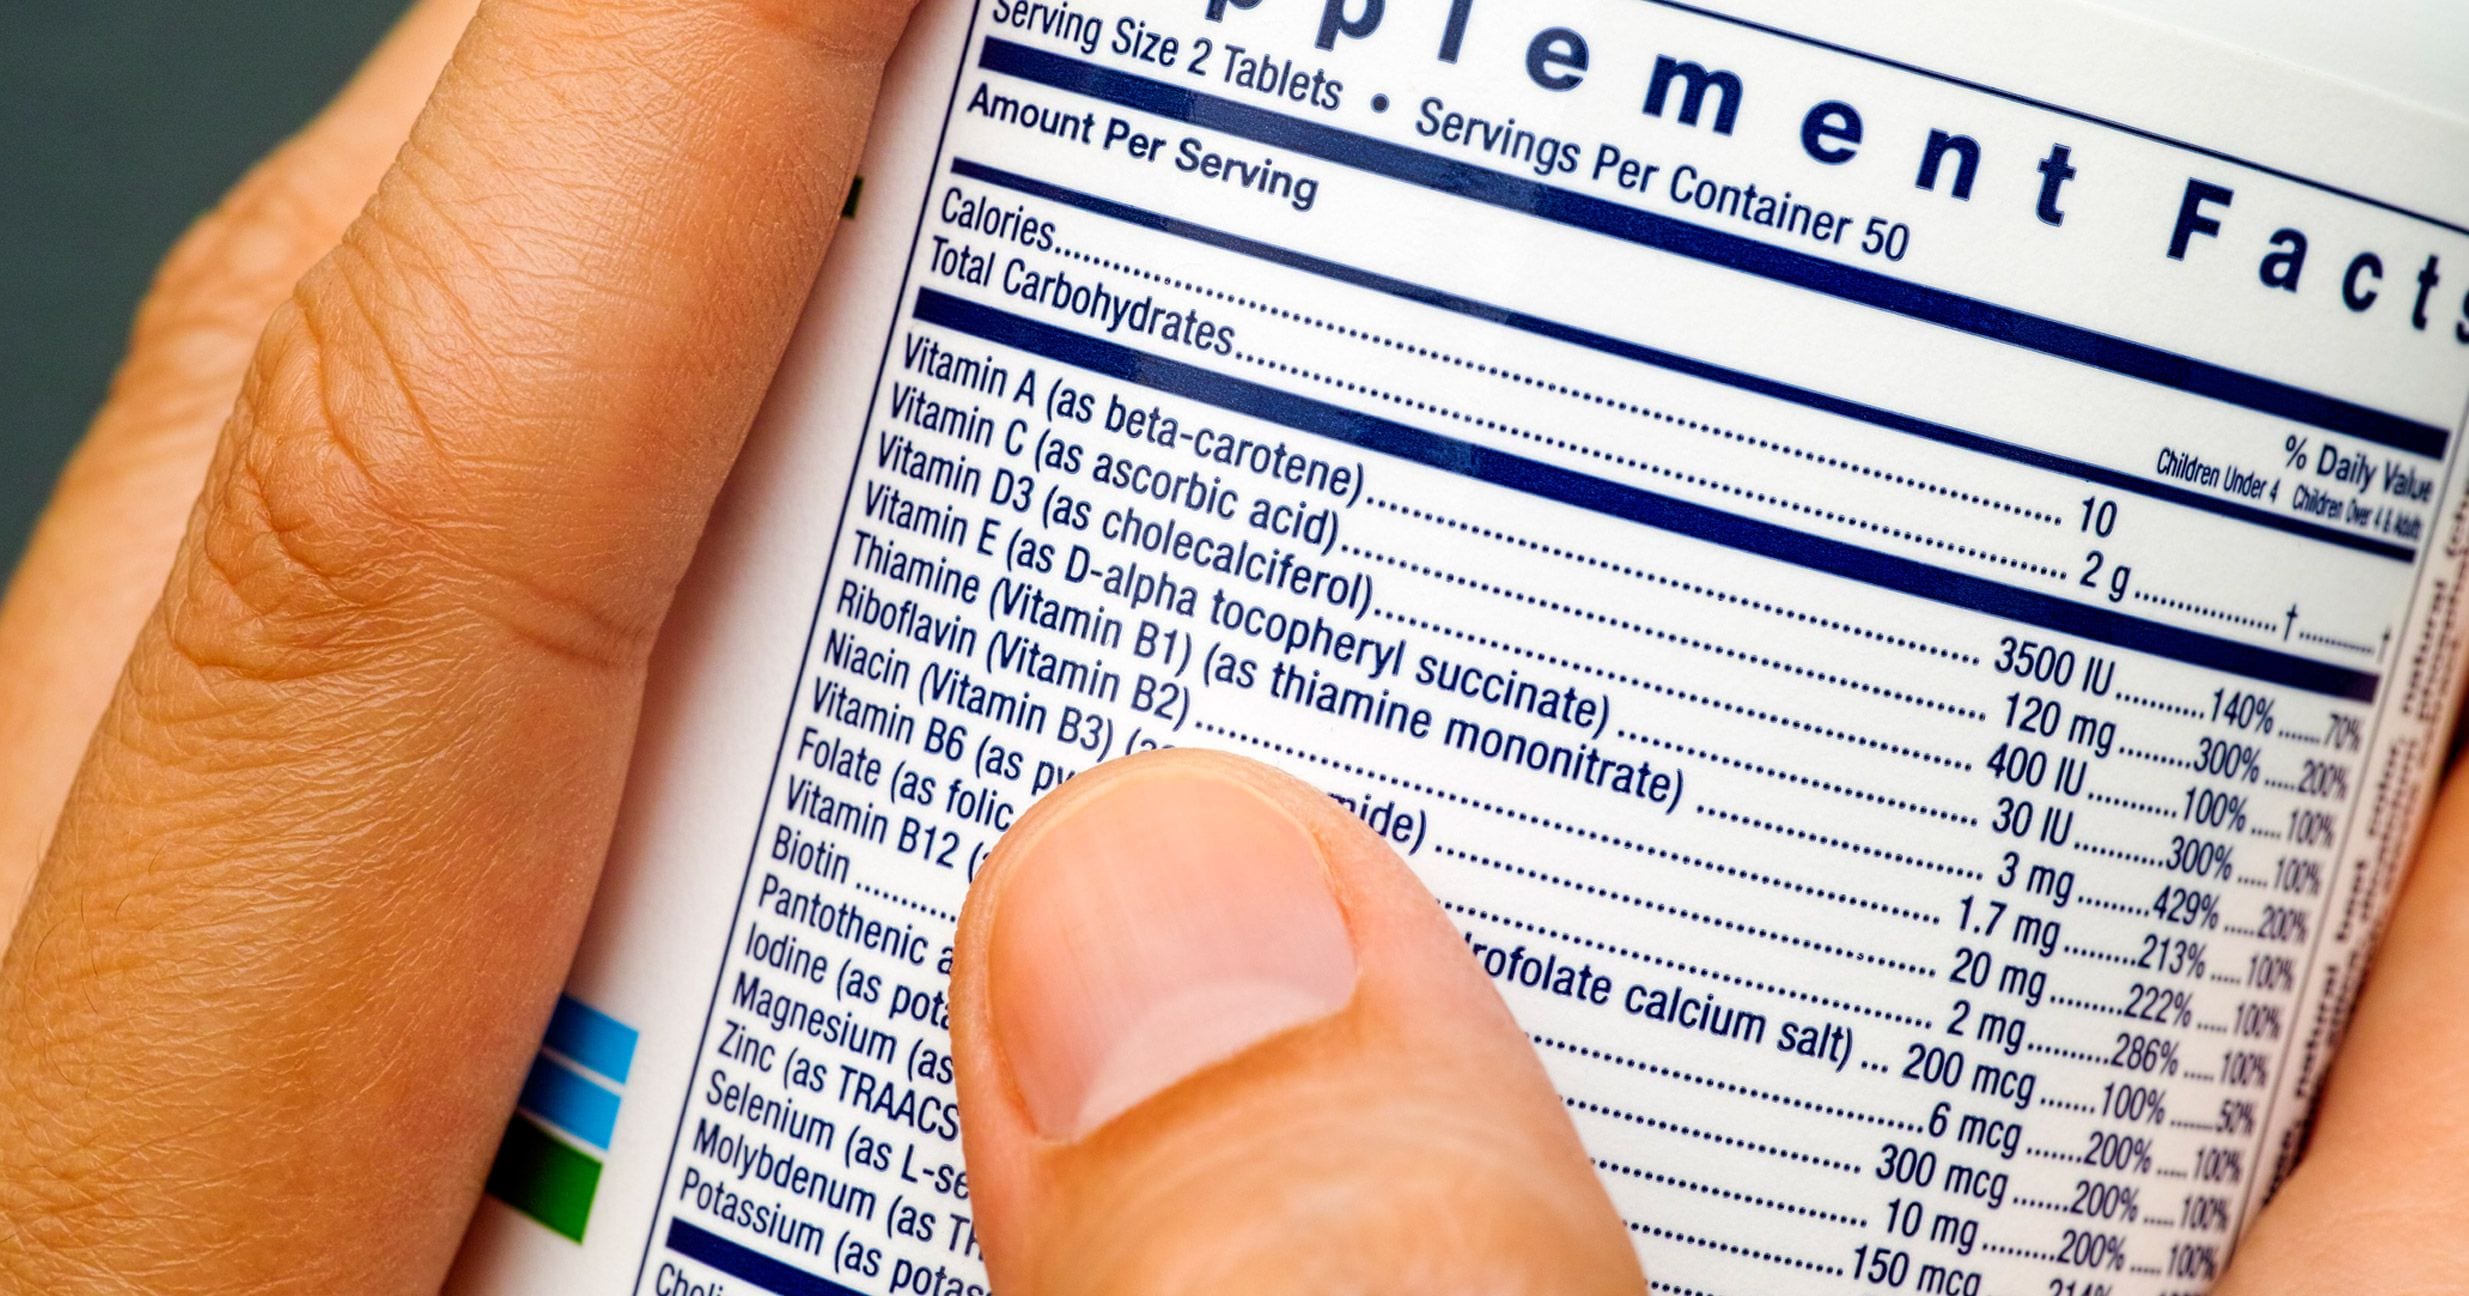 Vitamin Supplement label being looked at